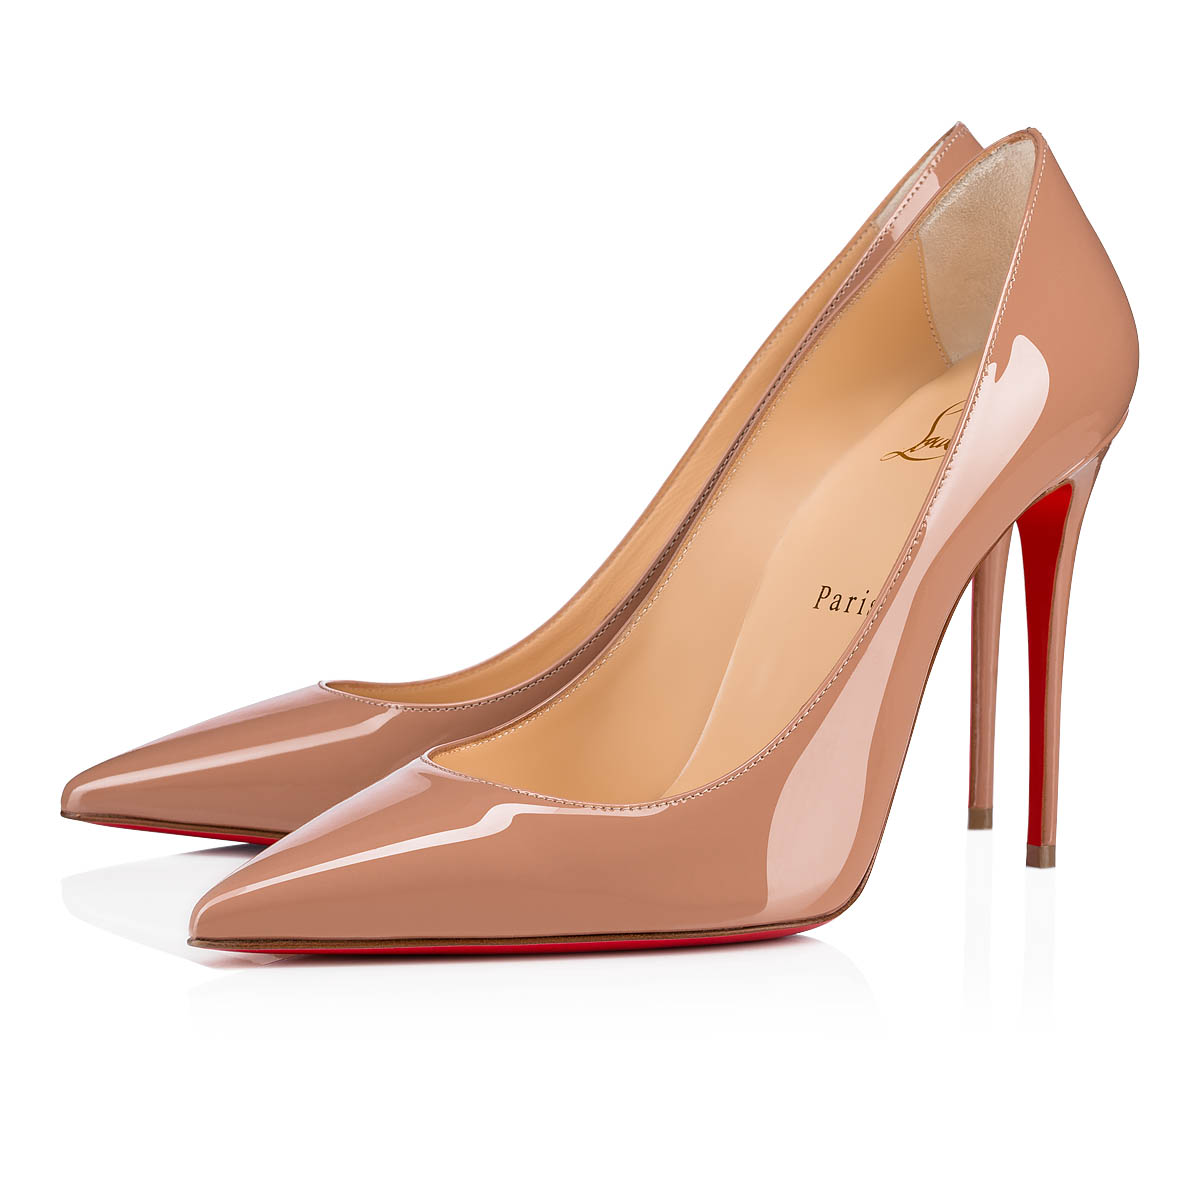 KATE 100 100 NUDE 6248 Patent - Shoes 